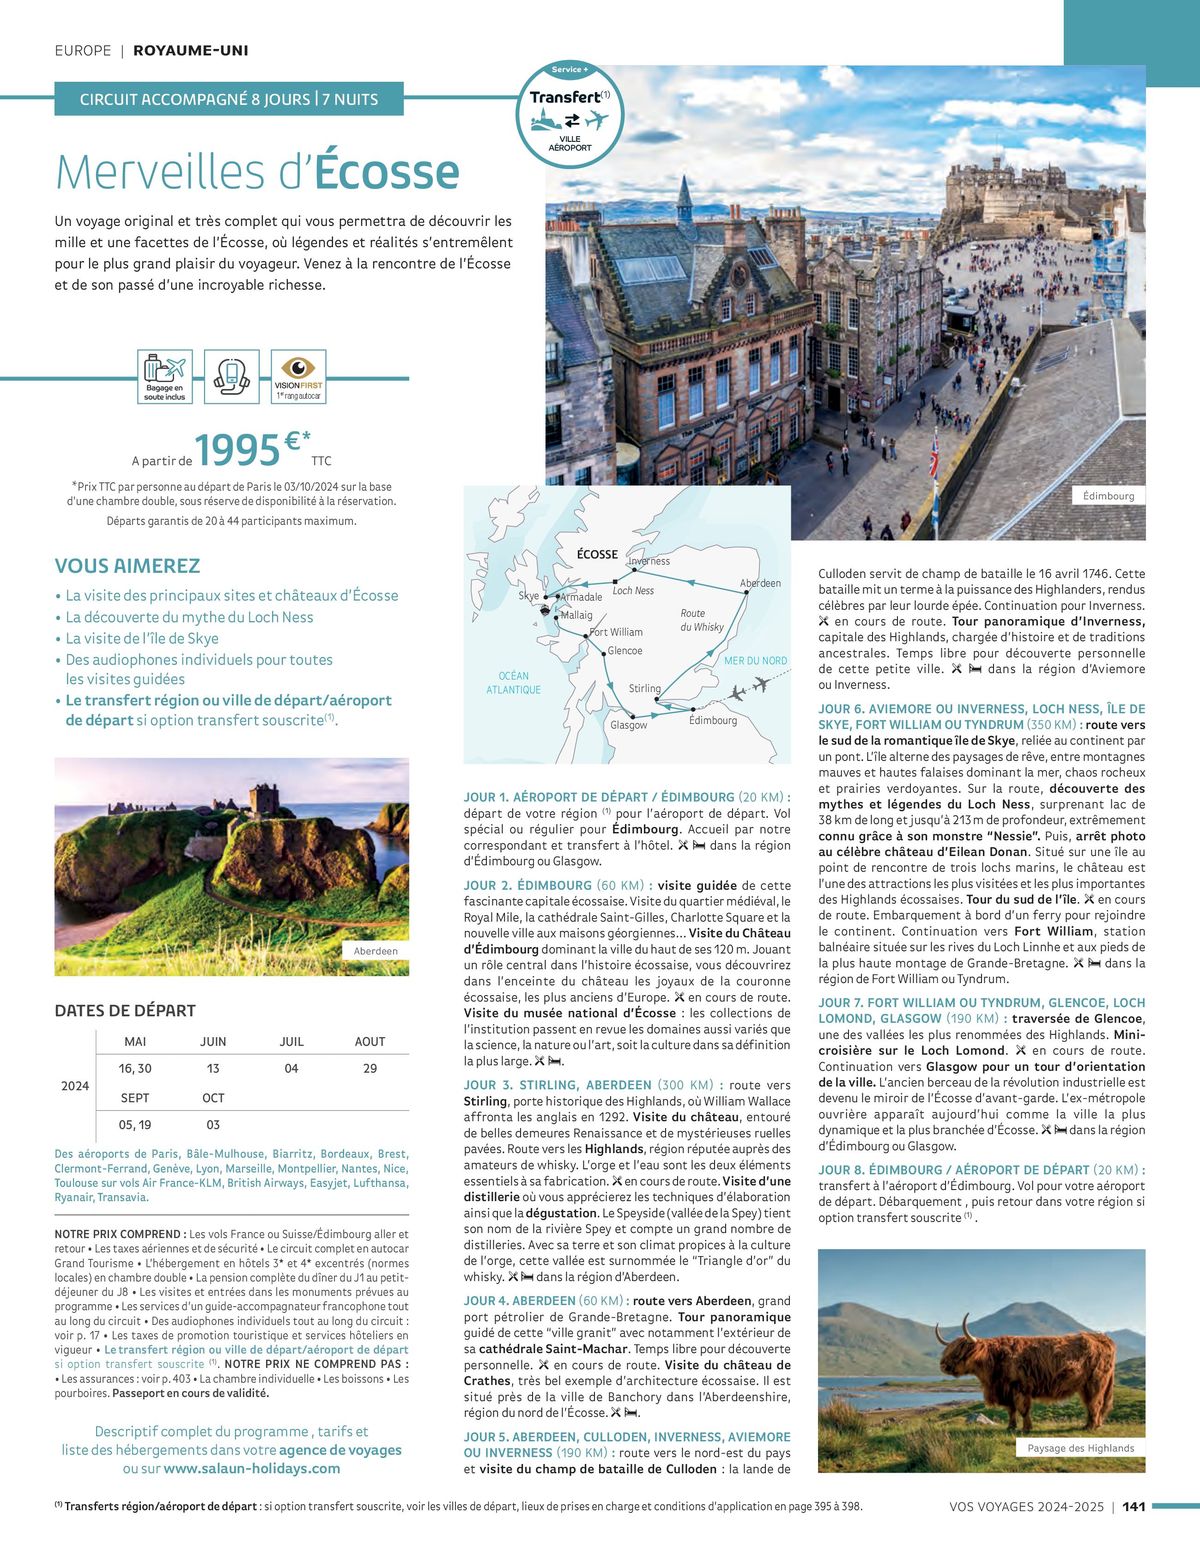 Catalogue Vos voyages 2024-2025, page 00141